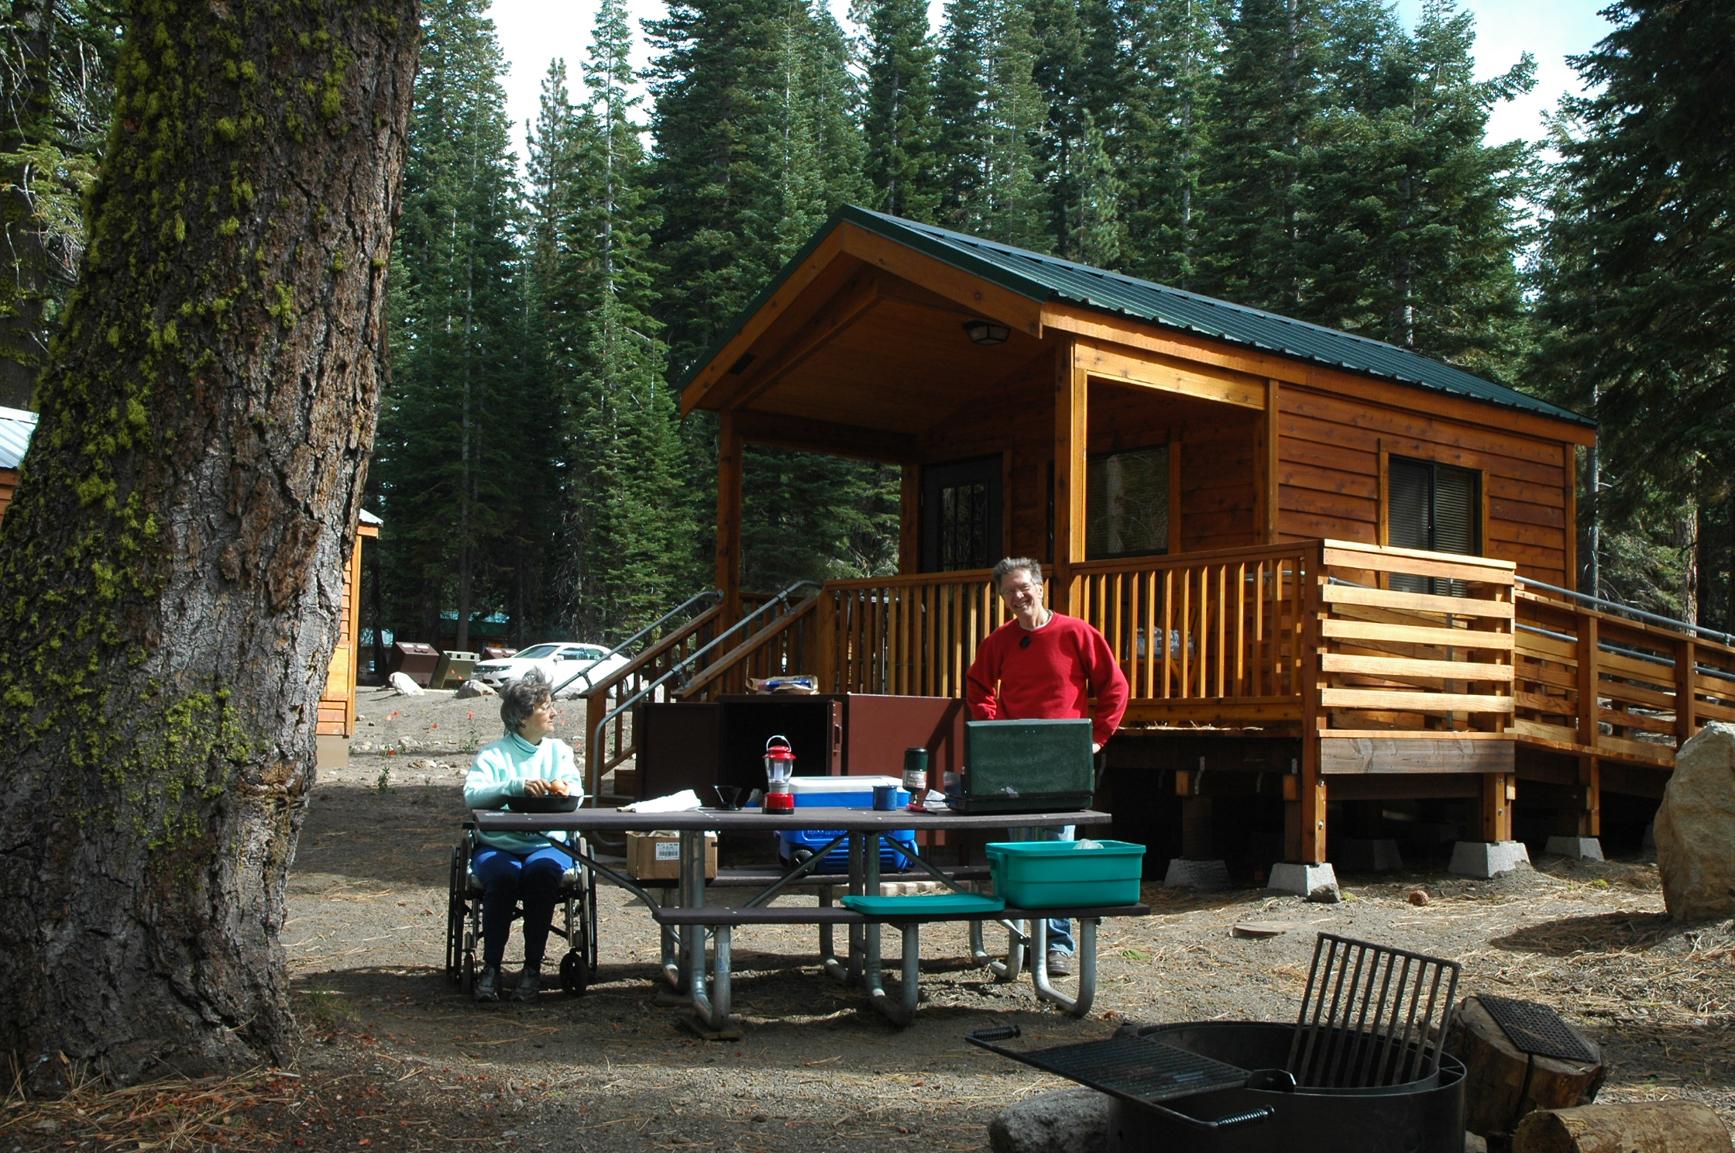 A woman sits in a wheelchair and a man stands at a picnic table backed by a small, wooden cabin.